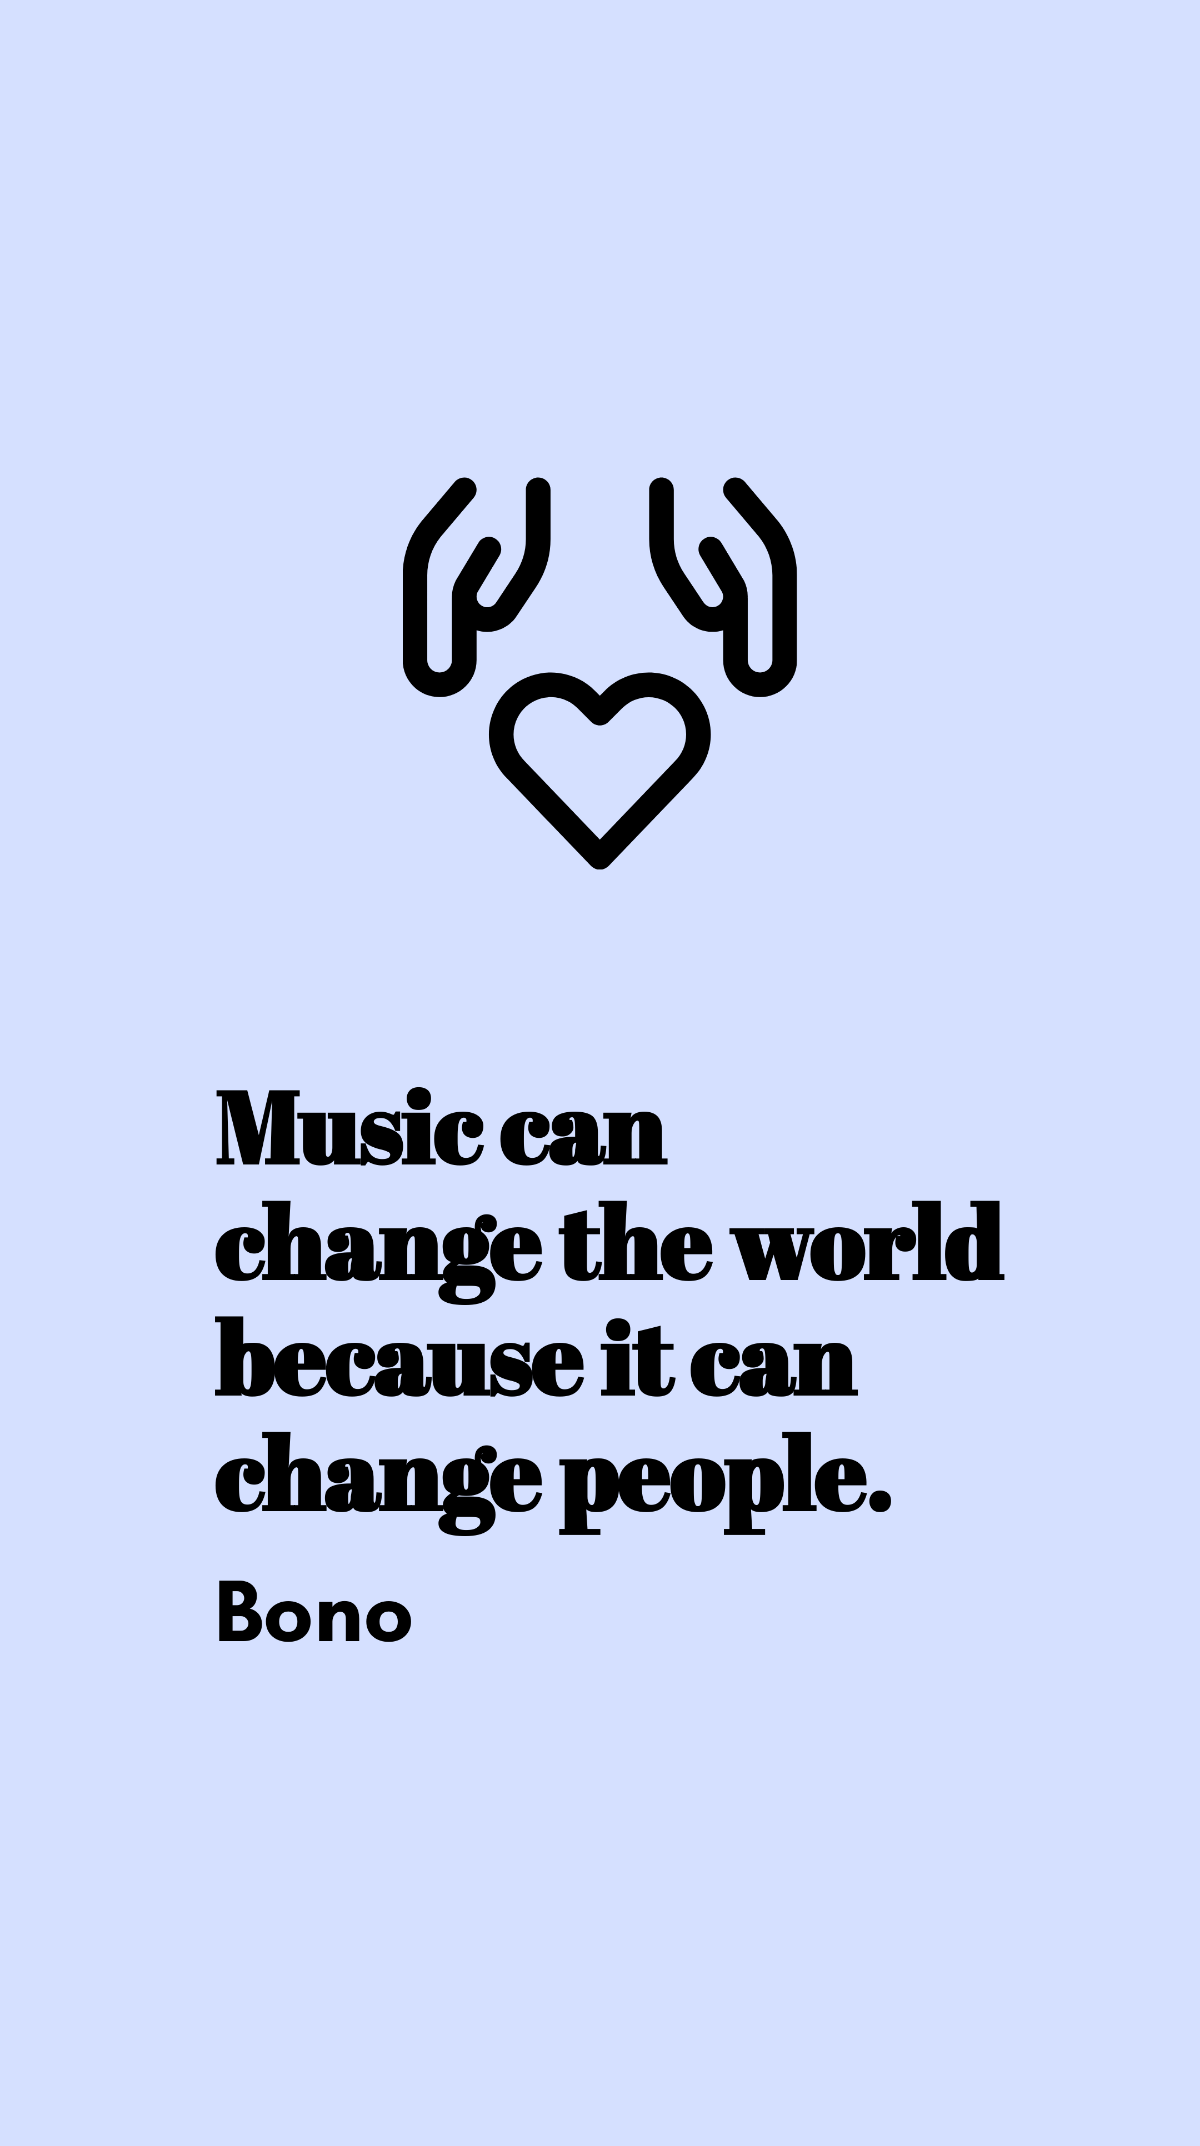 Bono - Music can change the world because it can change people. Template